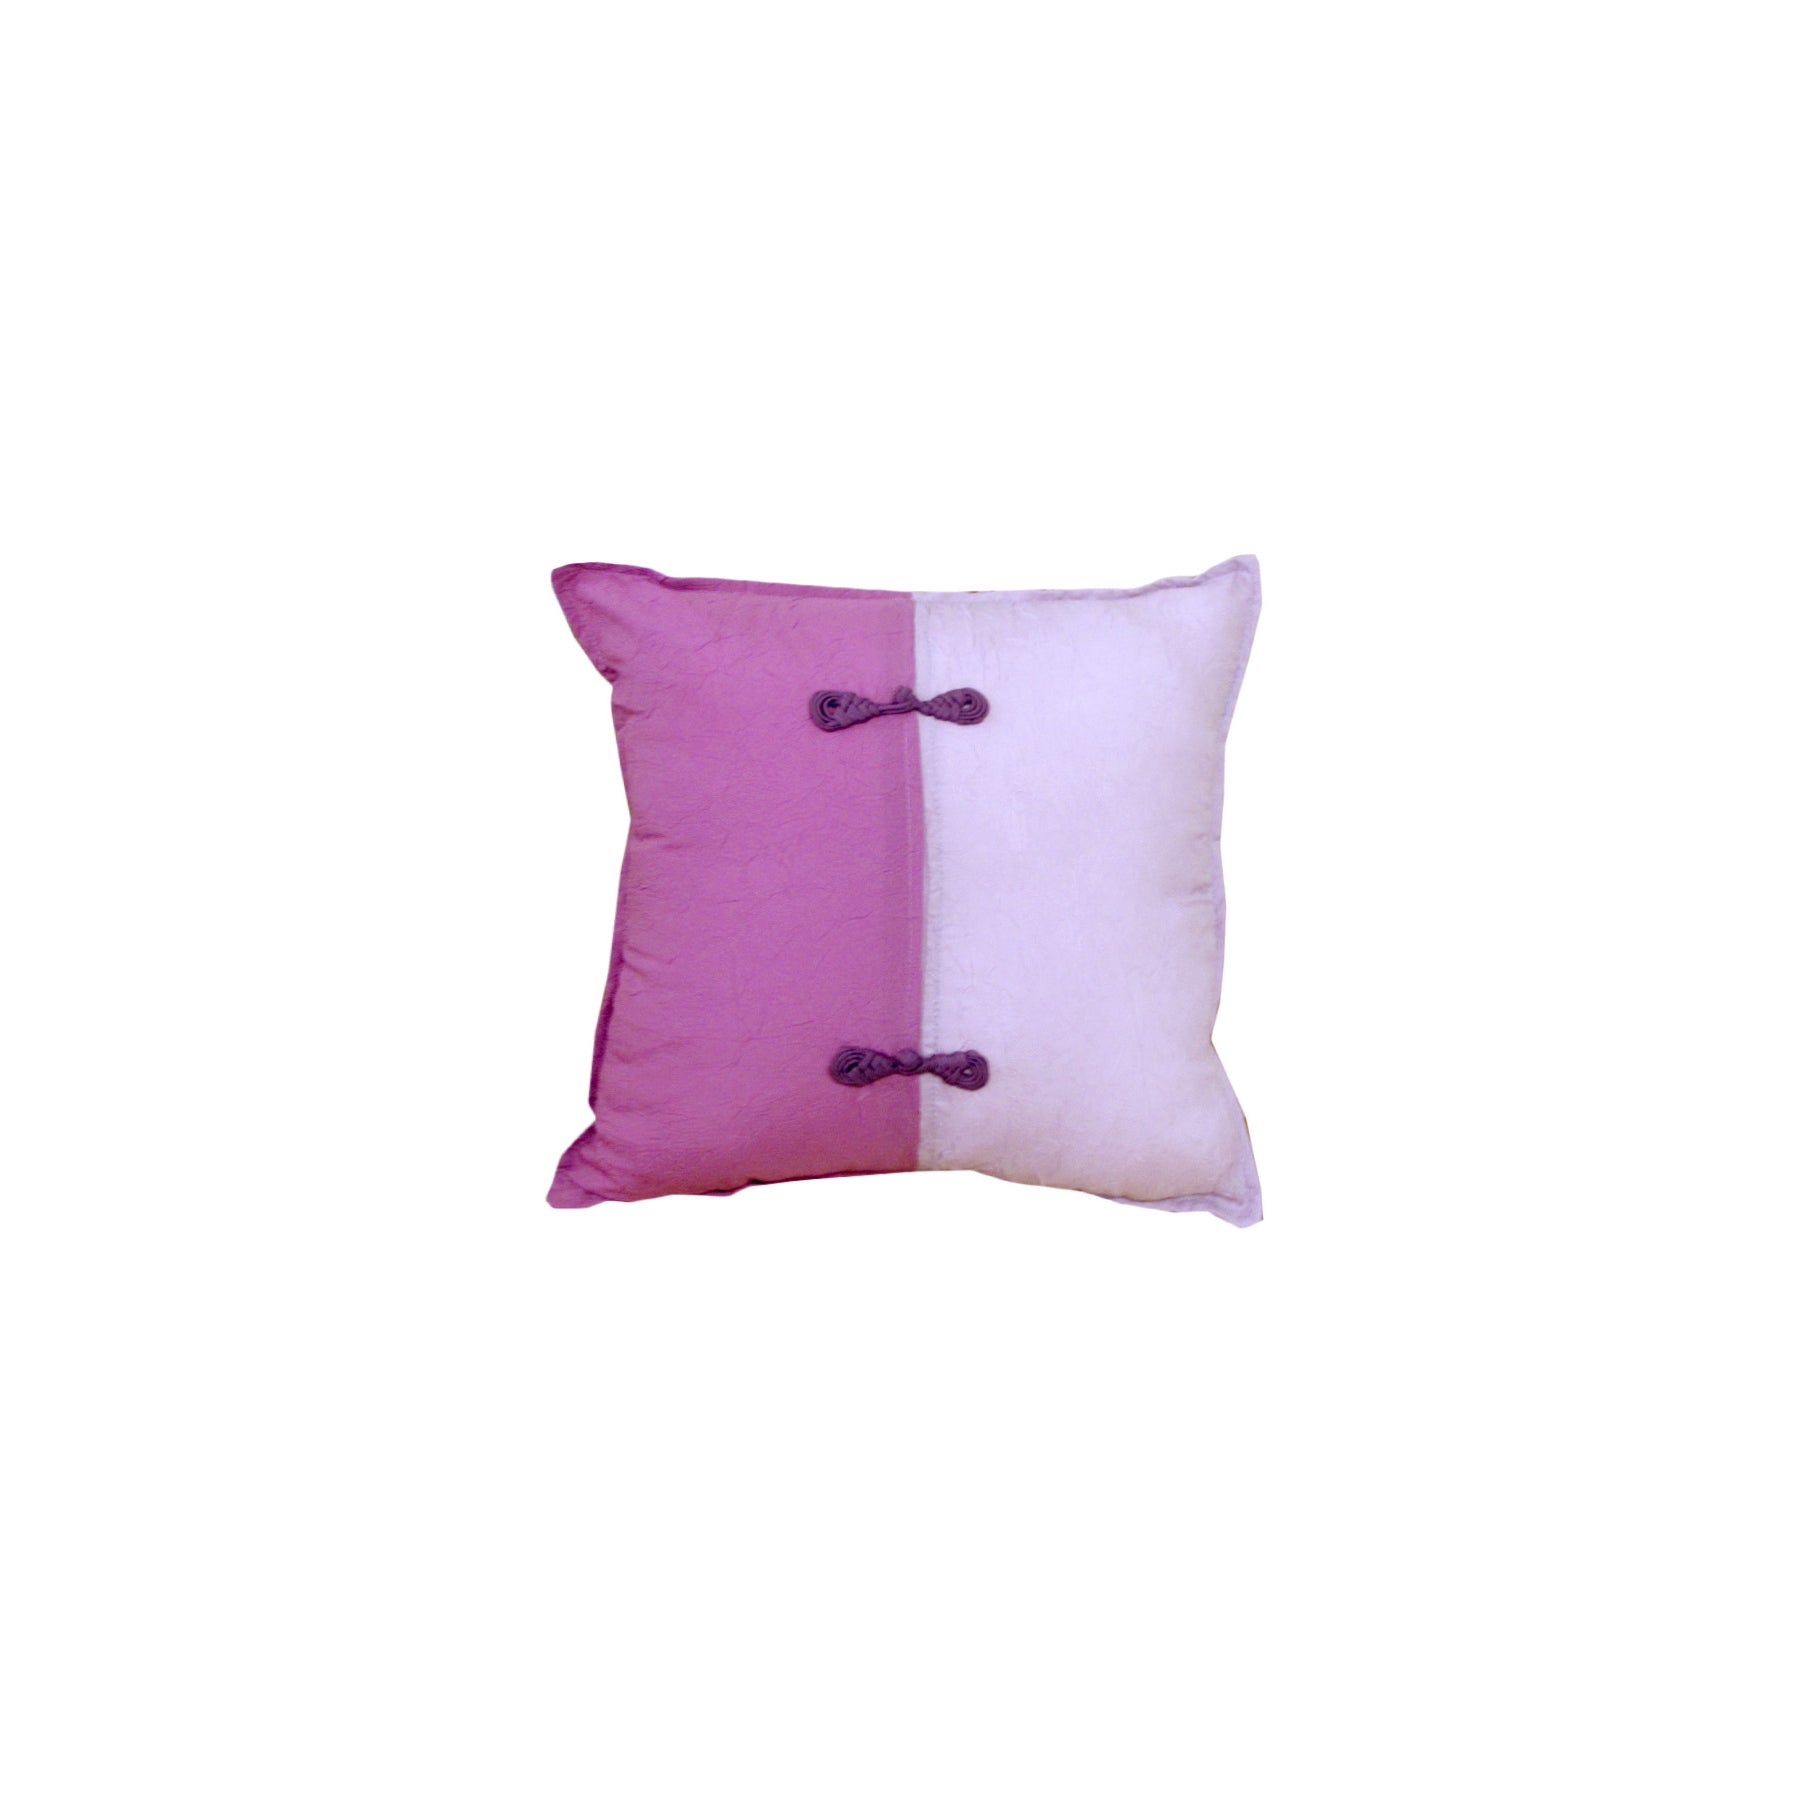 Scrunchie Orchid Cushion Cover